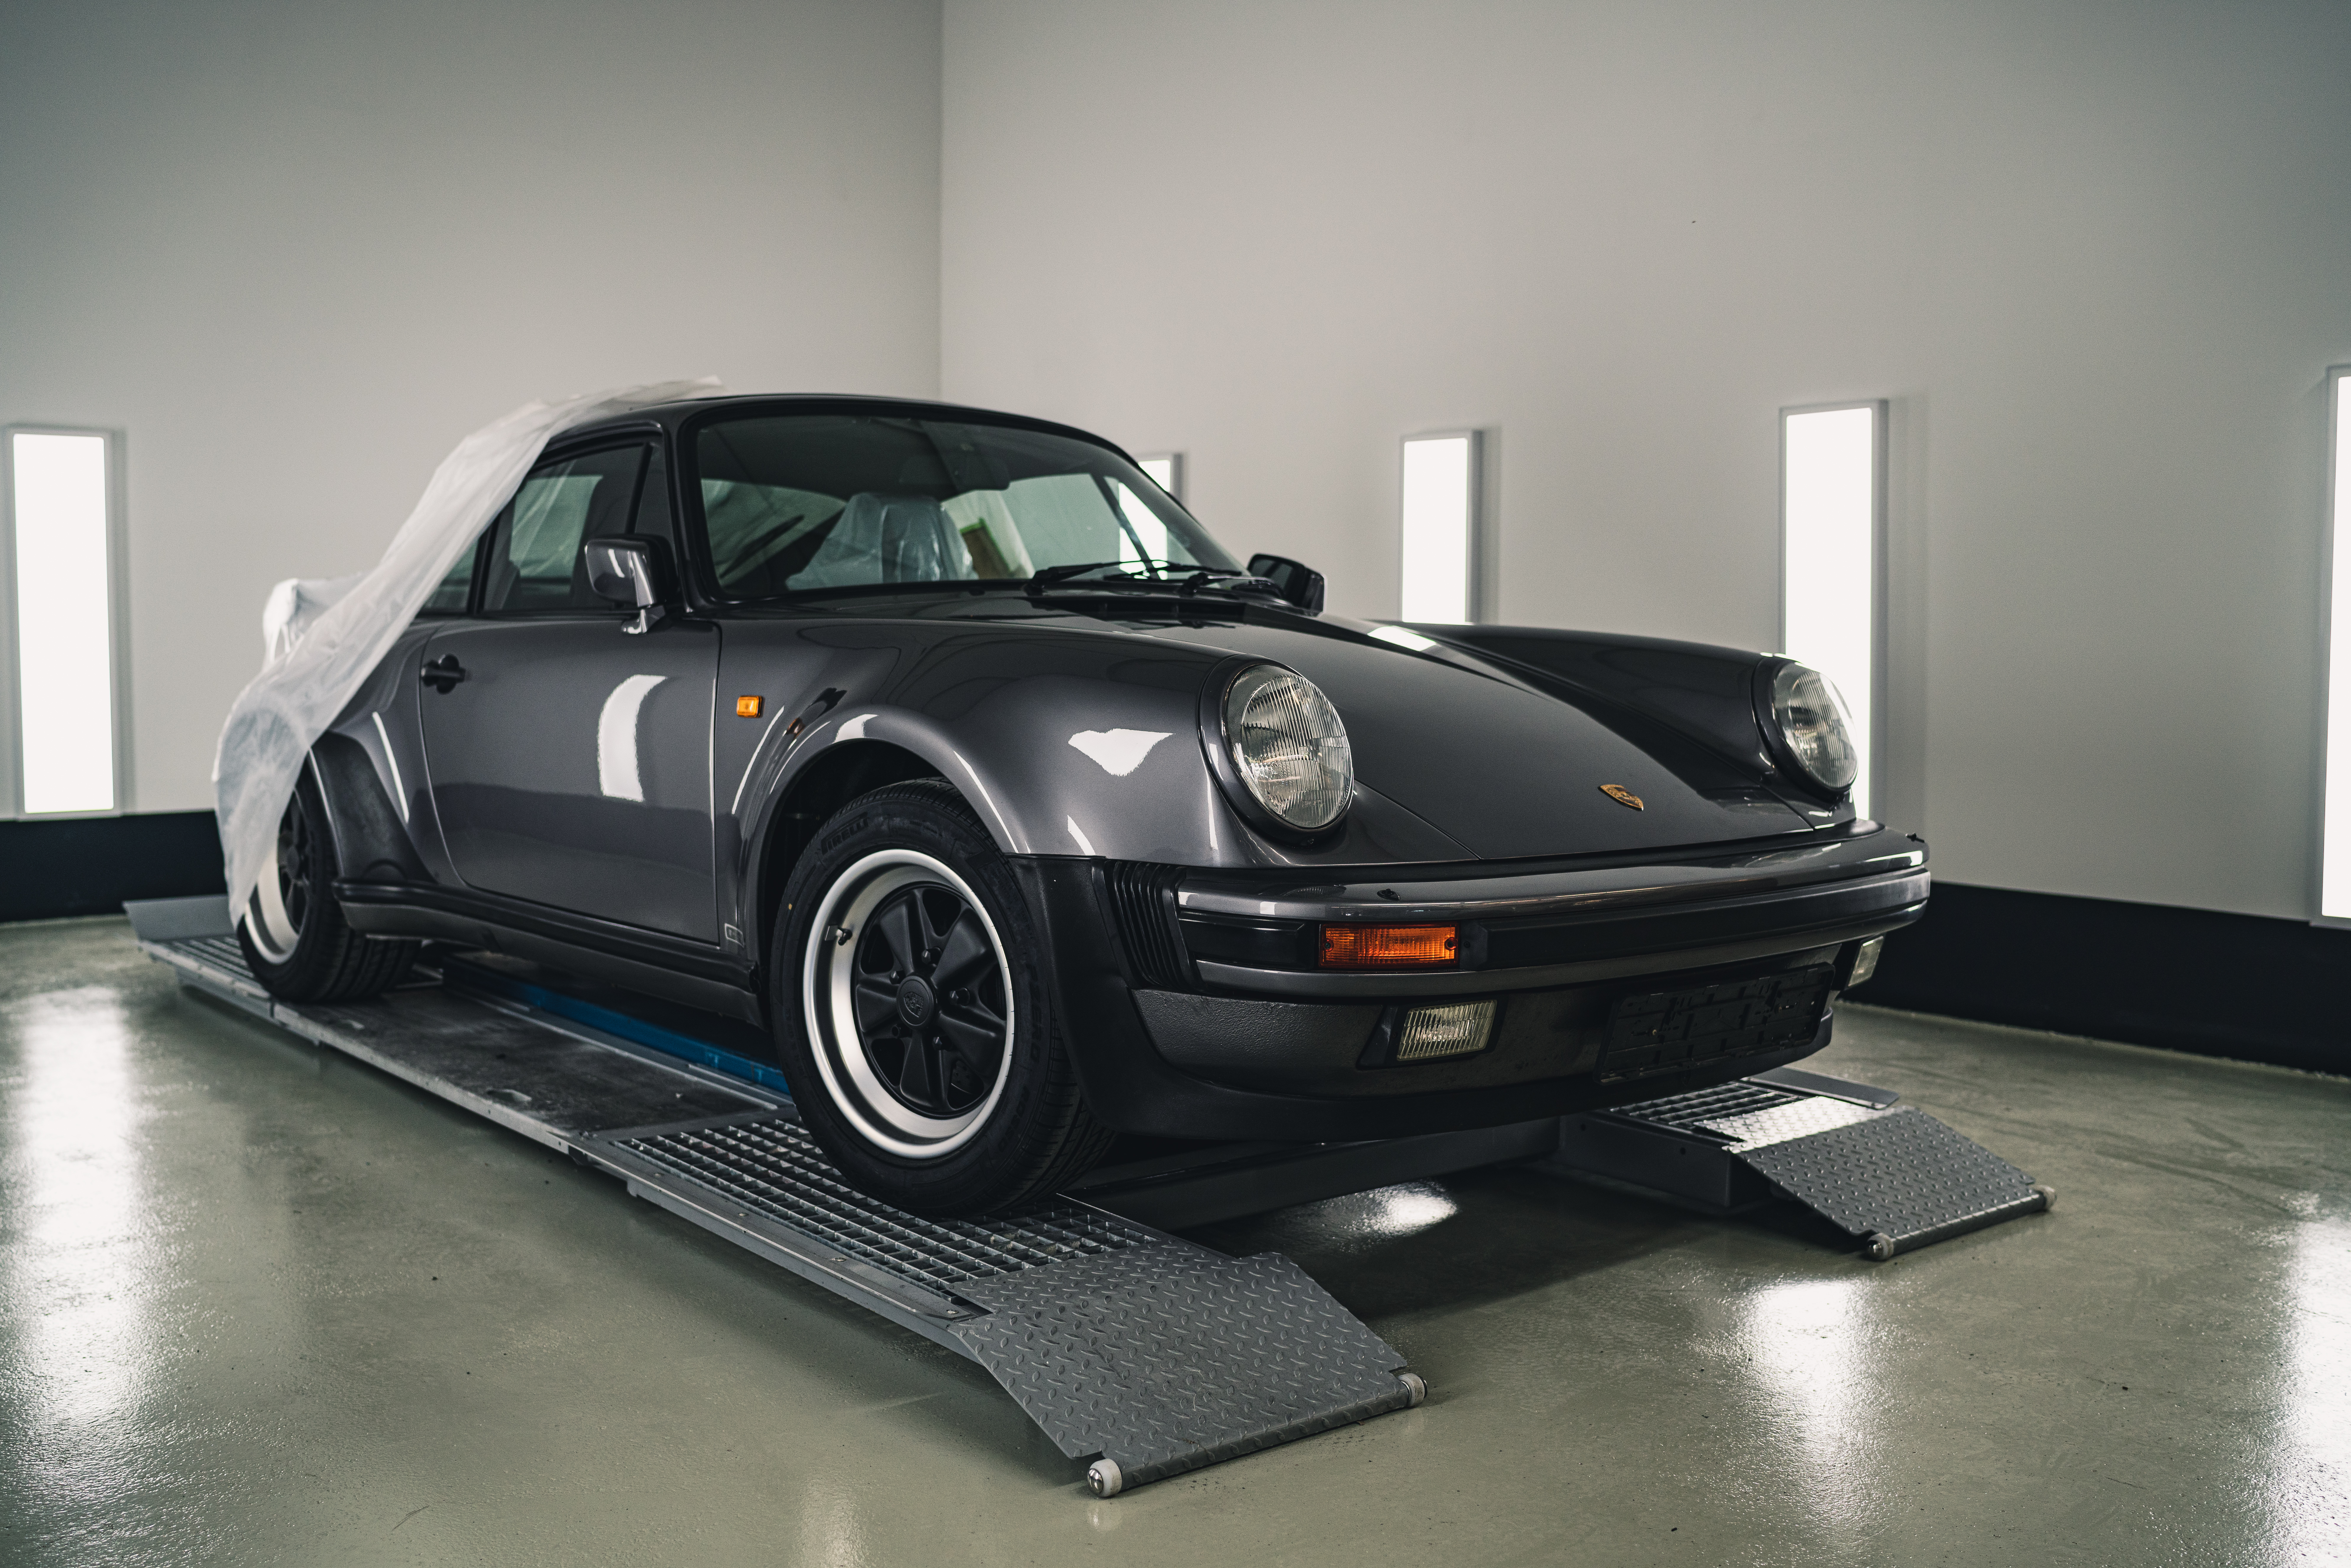 Porsche 911 revealed from beneath protective covers at Porsche Classic